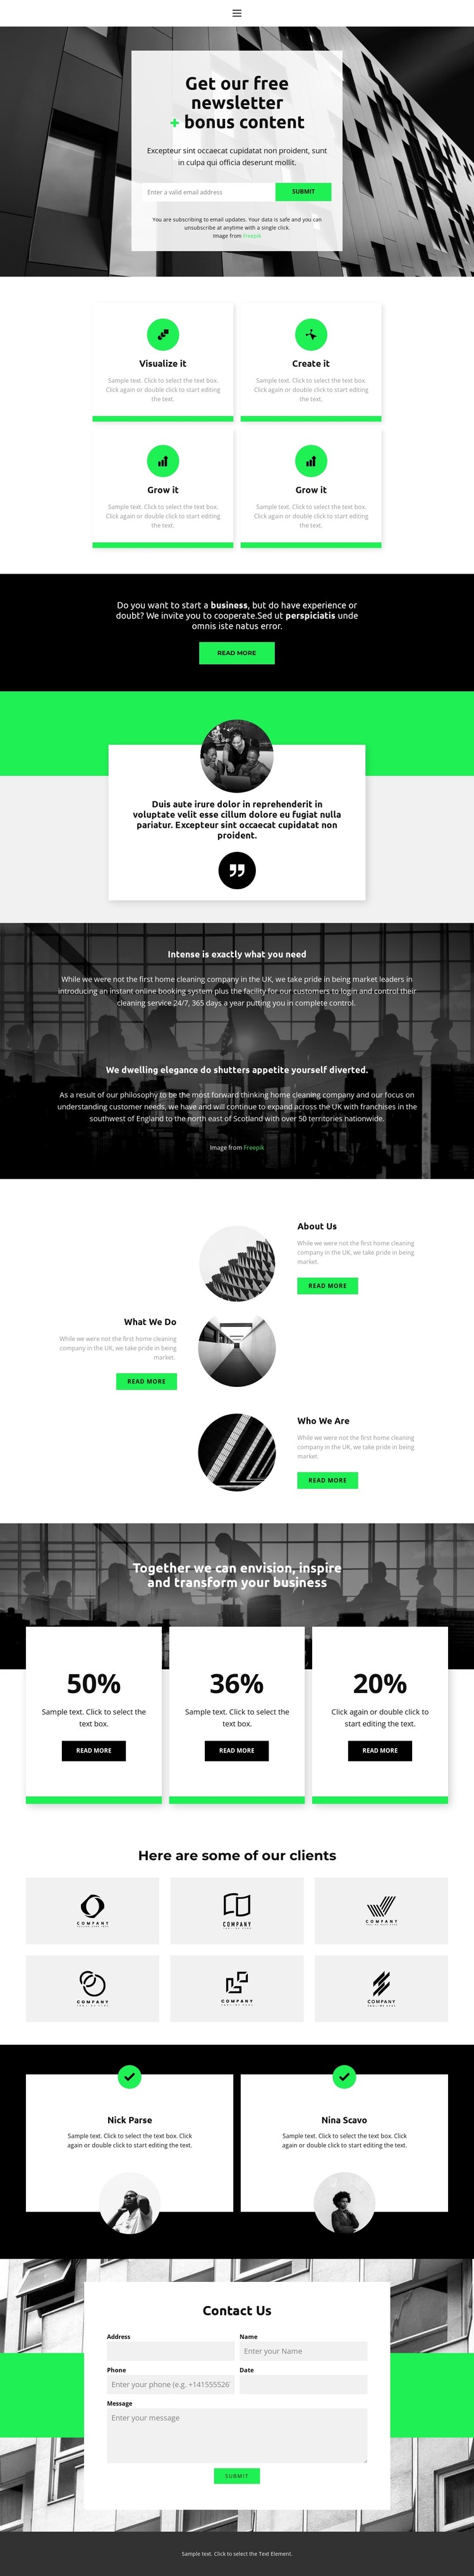 Get a free chance HTML Template